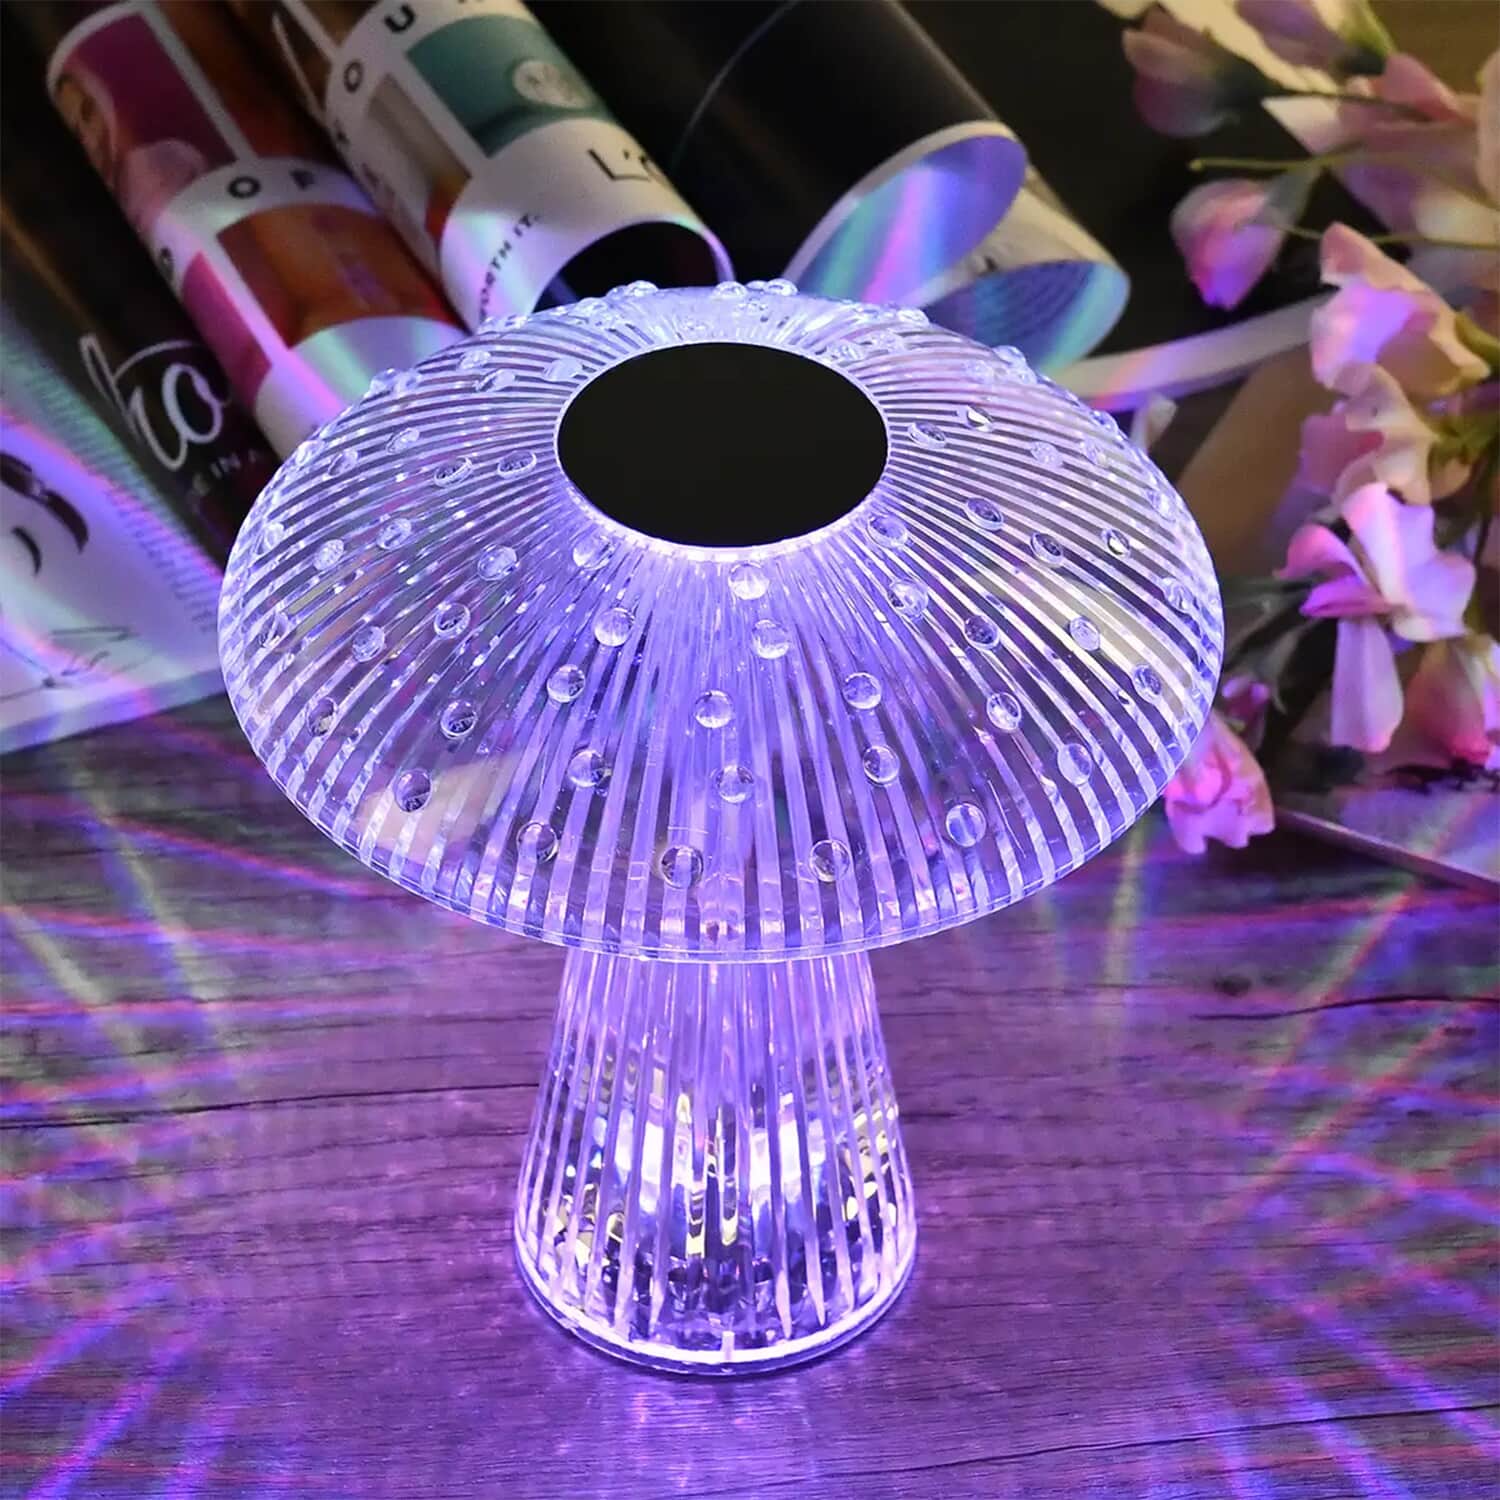 Buy Remote Control Mushroom Shaped Crystal Table Lamp with Multi Color  Changing Lights at ShopLC.